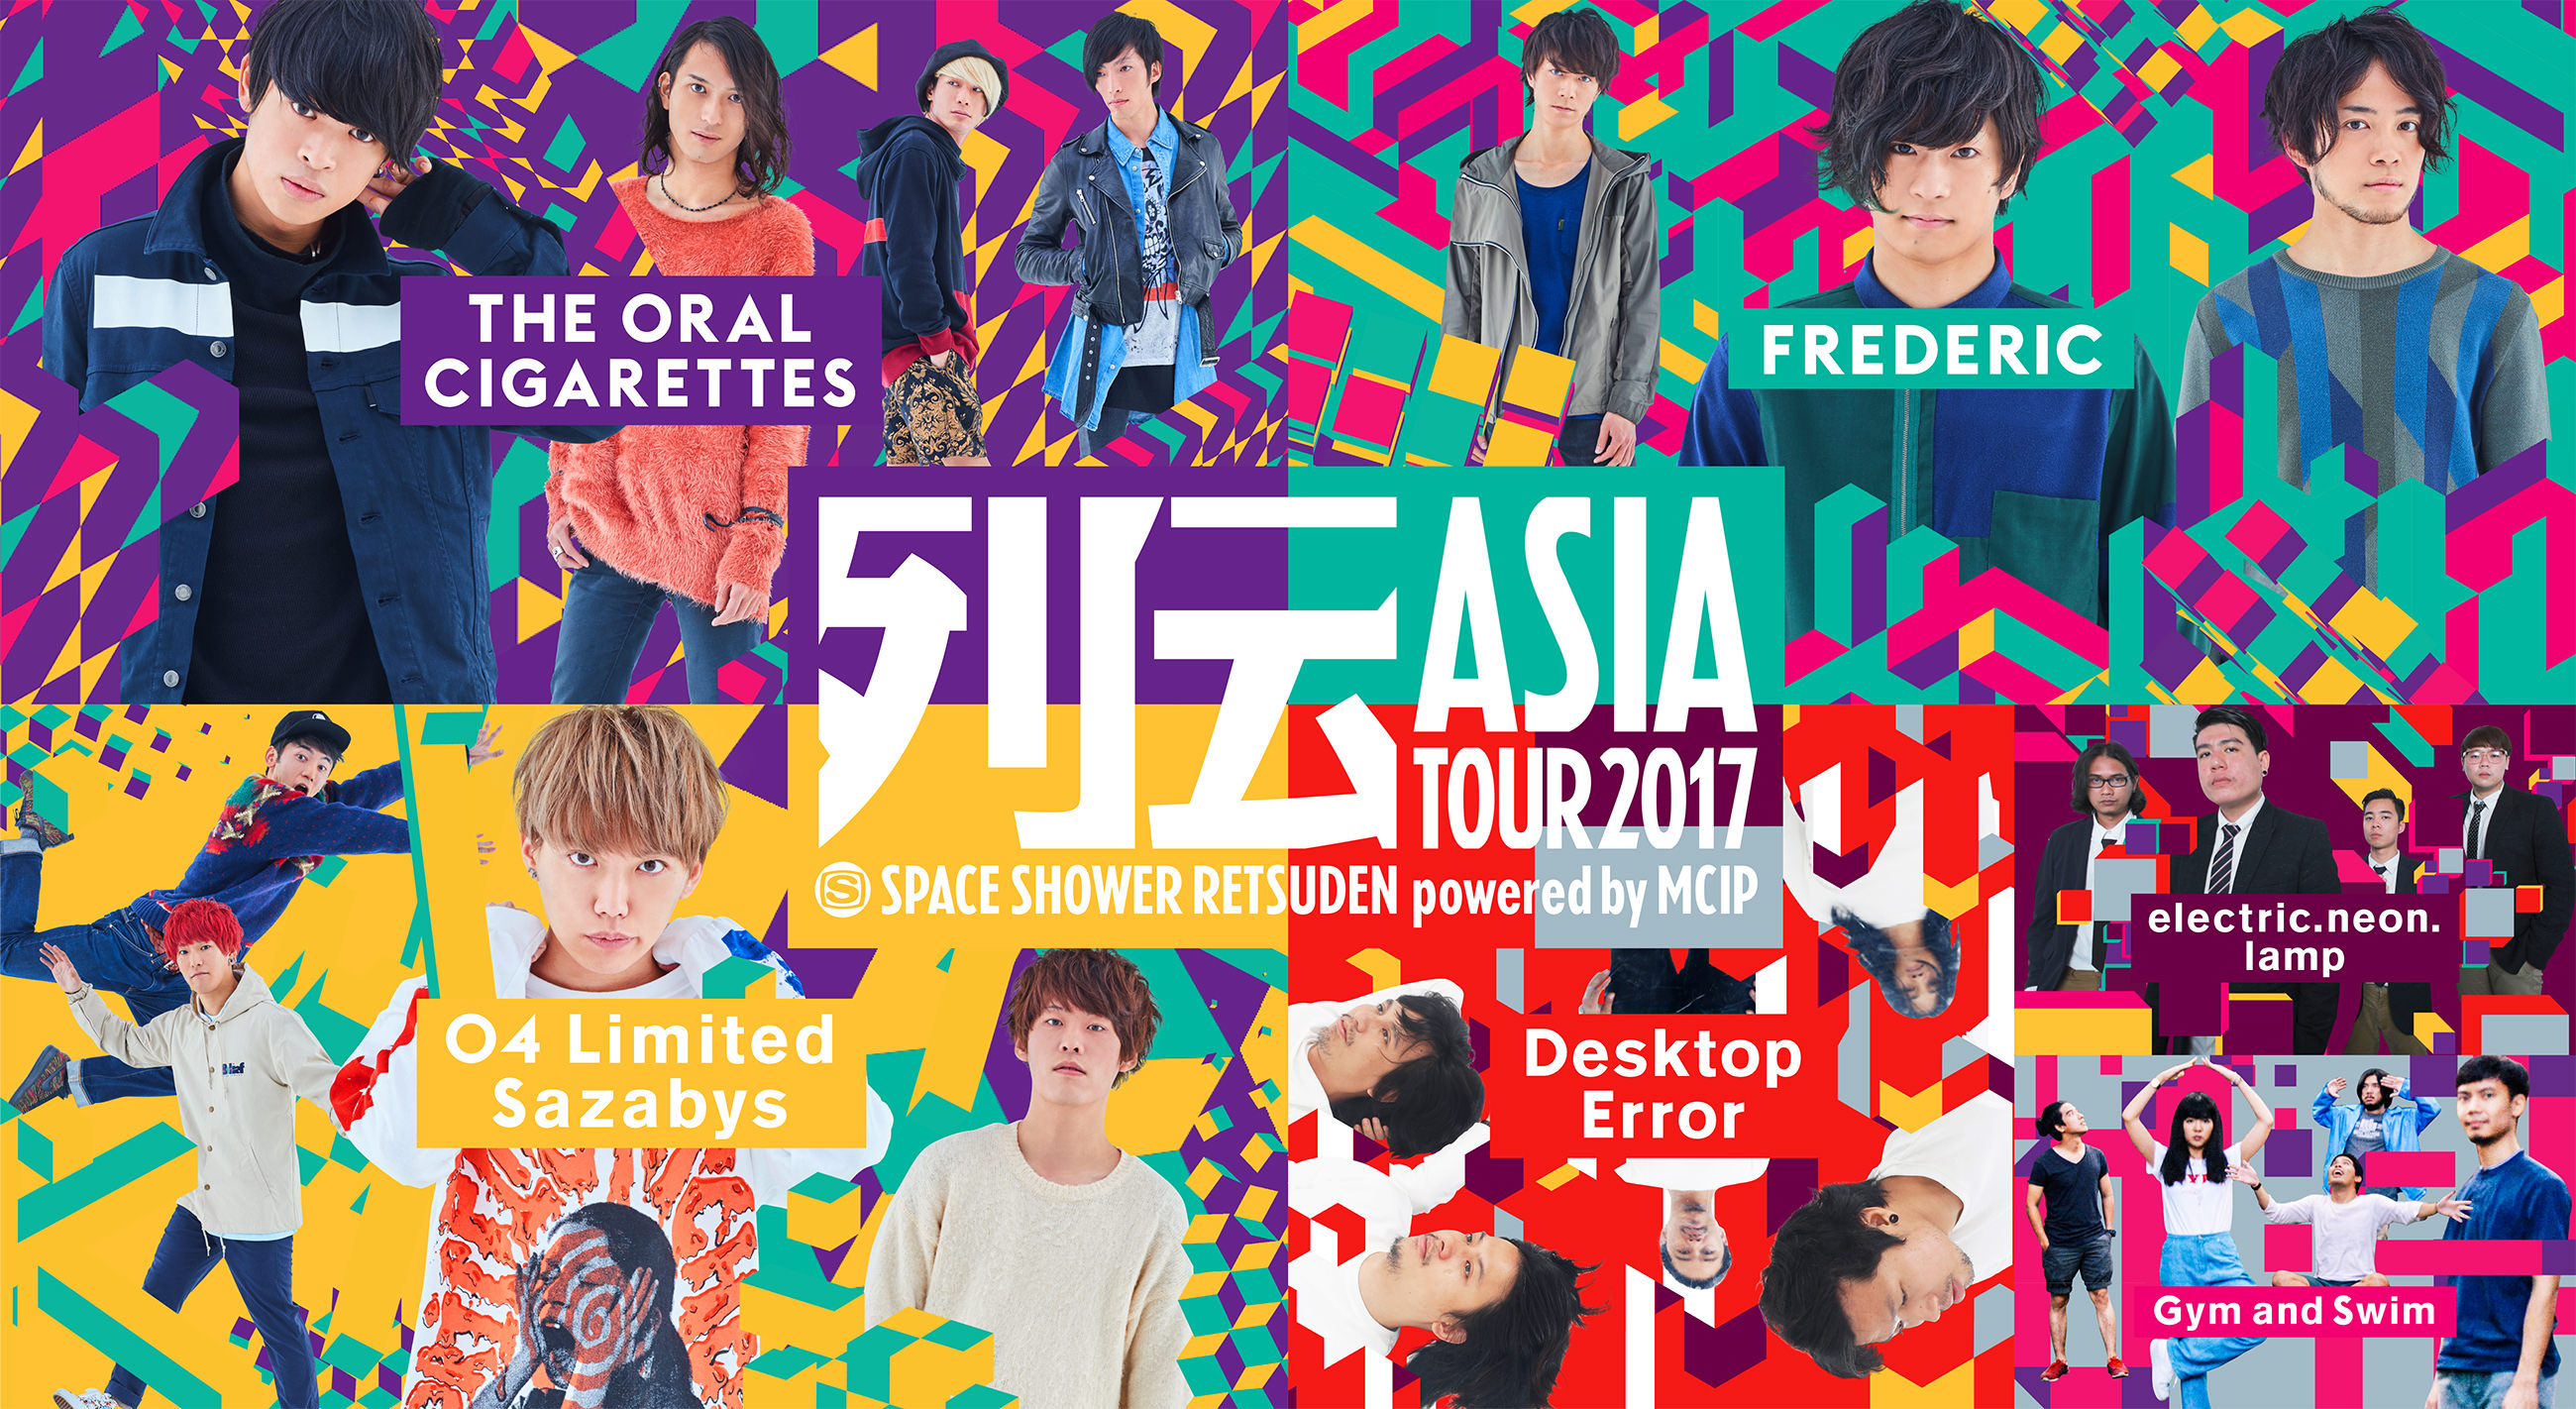 SPACE SHOWER RETSUDEN ASIA TOUR 2017 powered by MCIP